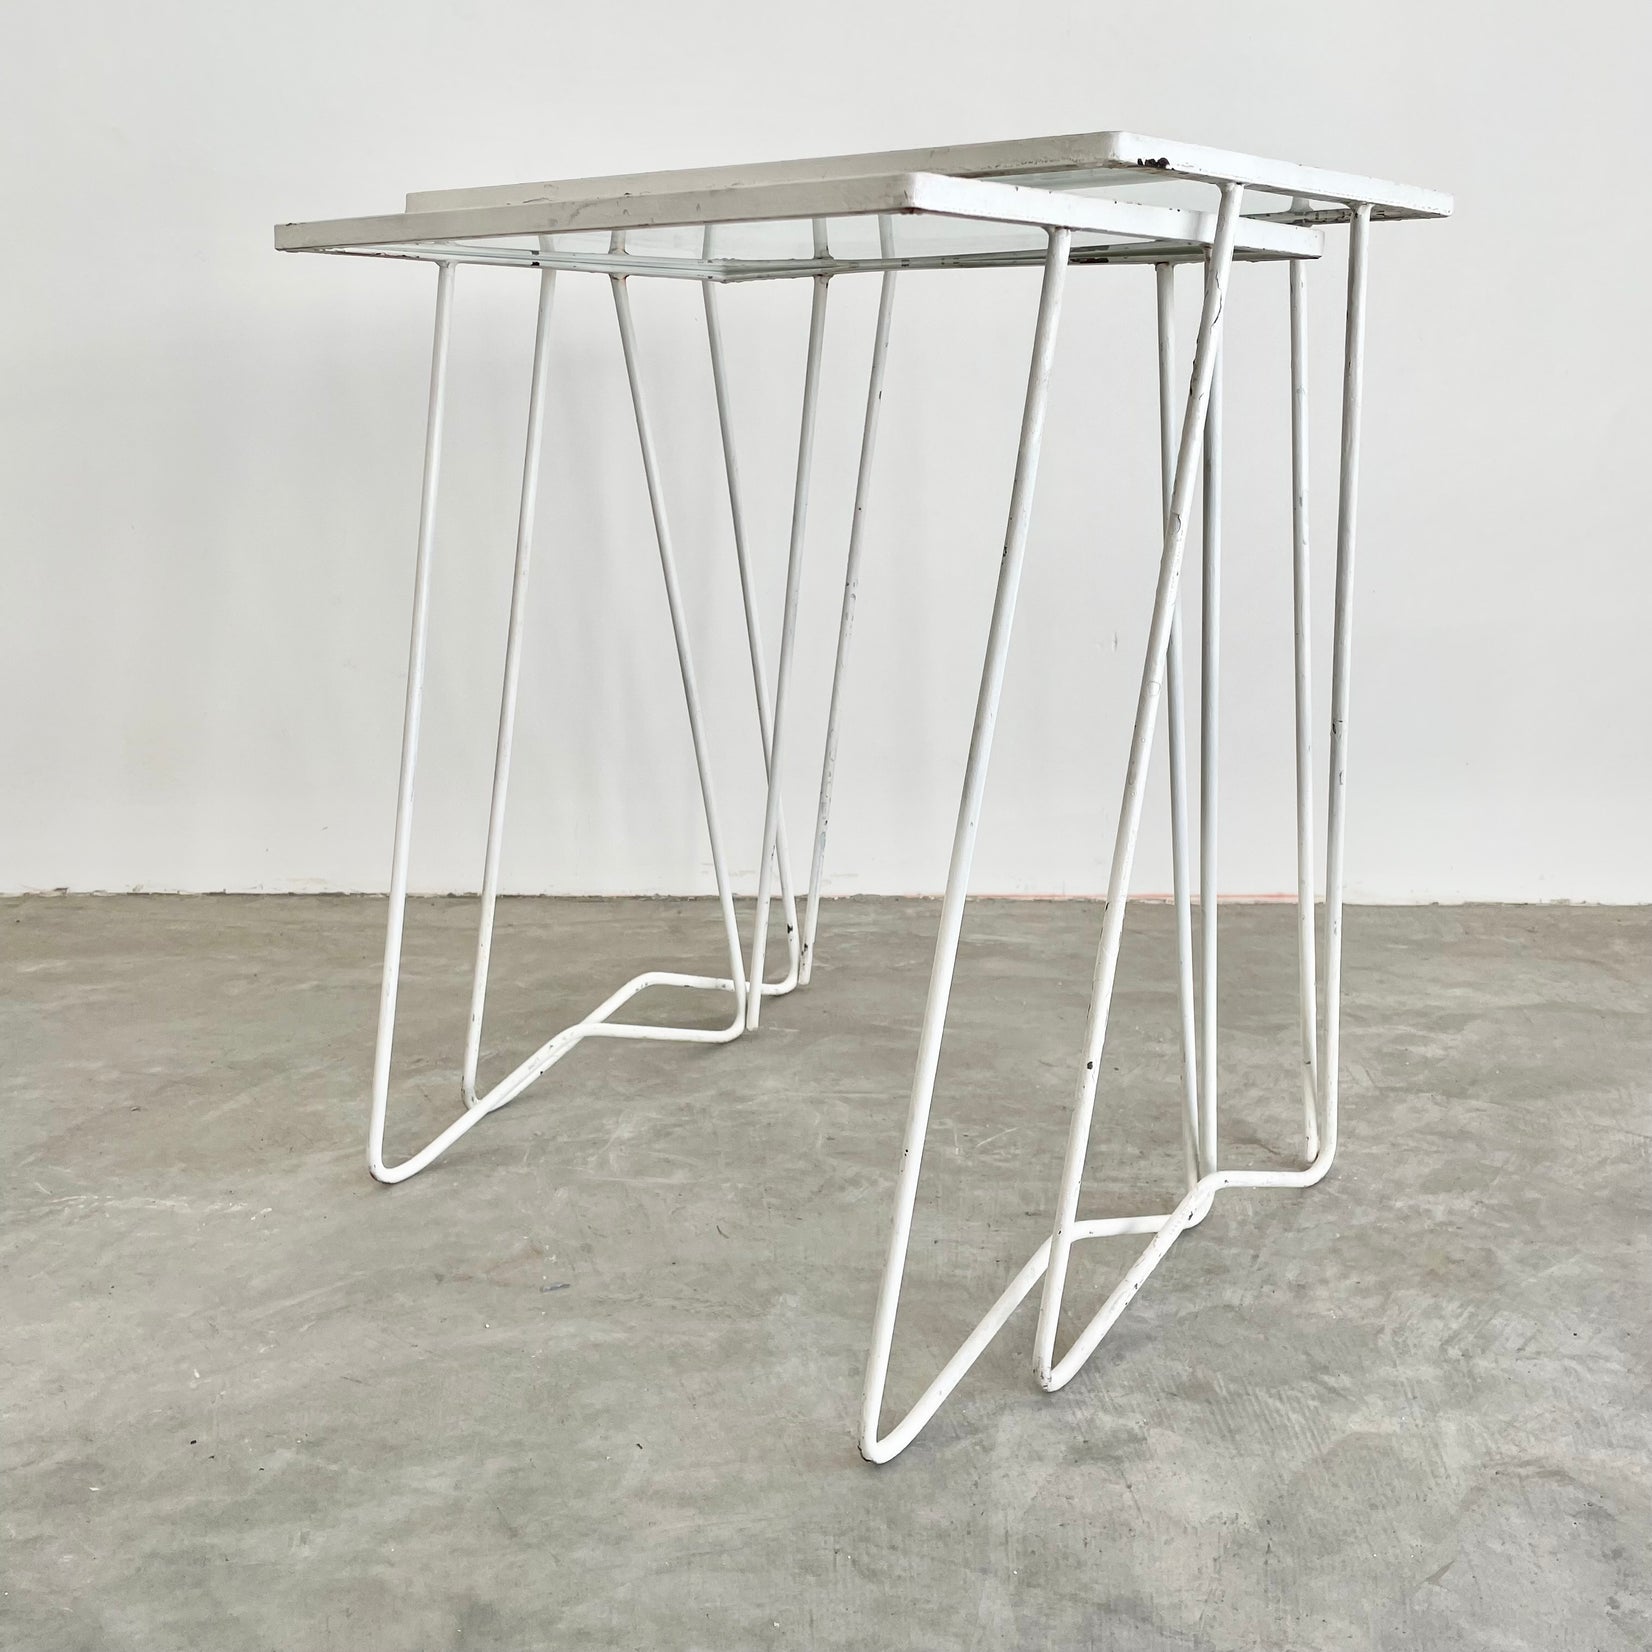 Pair of Iron and Glass Nesting Tables, 1970s USA